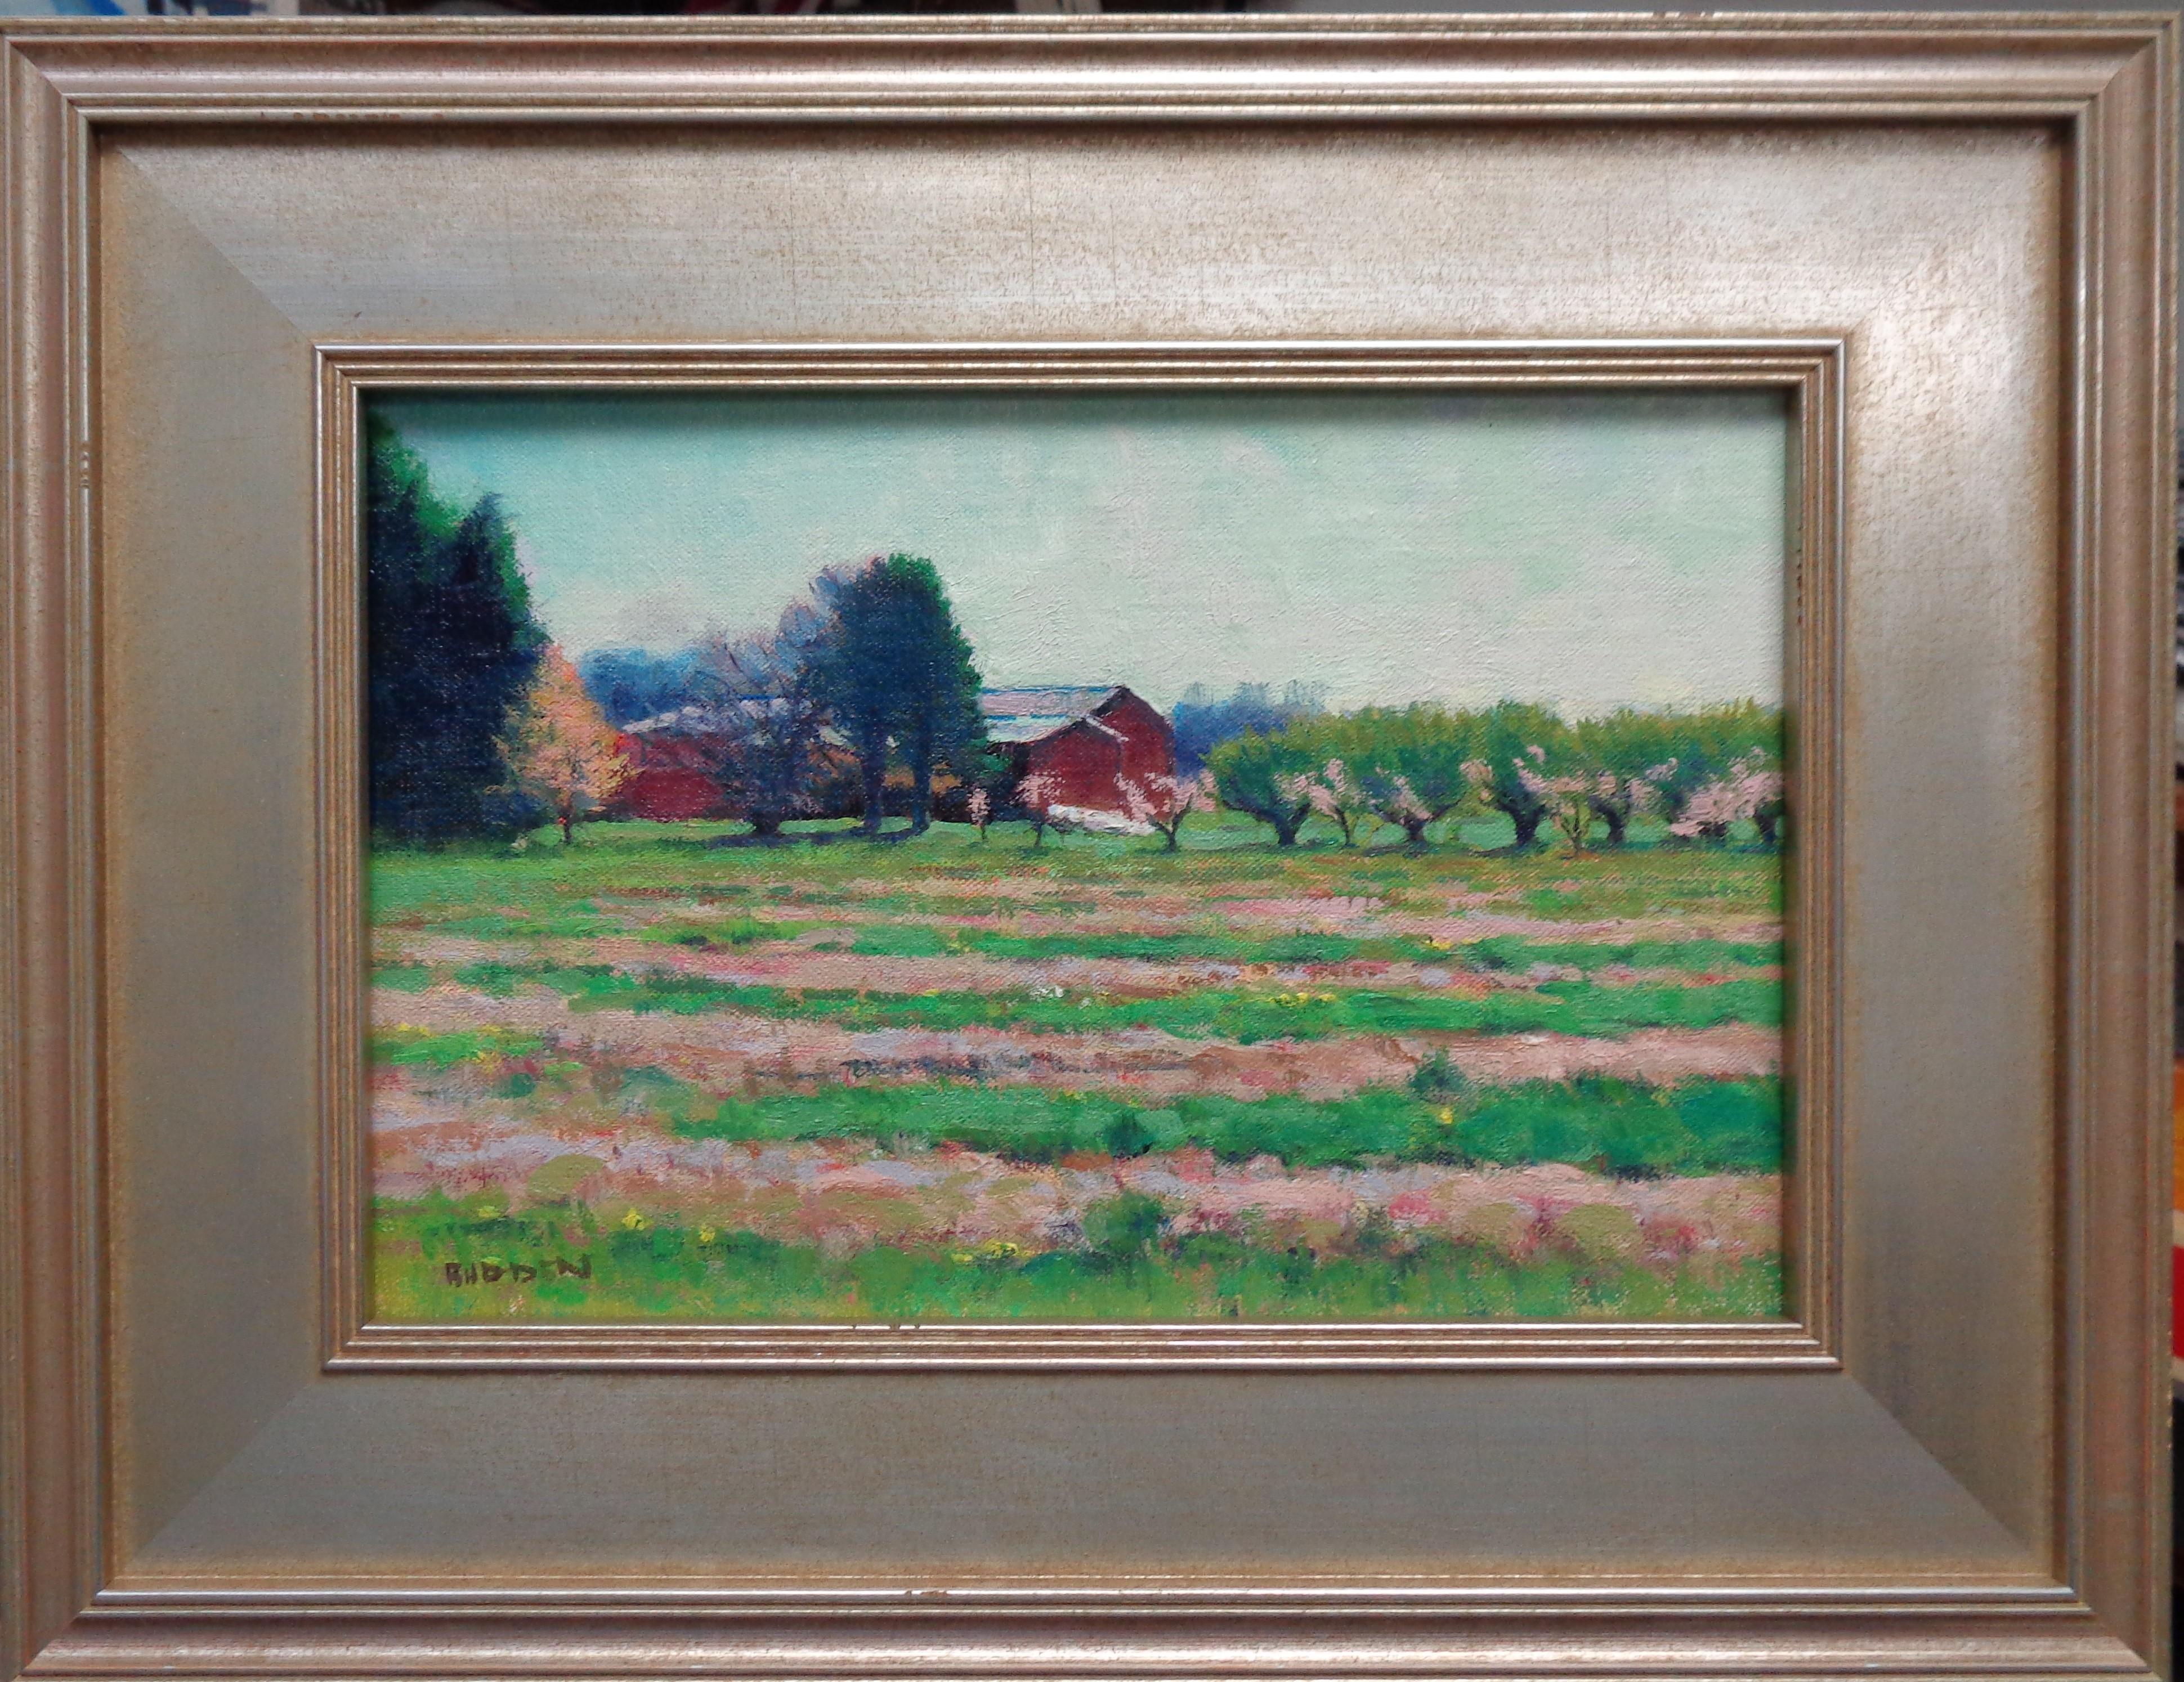 Spring Sparkle Farm is a beautiful impressionistic landscape oil painting that I did on location near my studio in 2016. The painting on a canvas panel and exudes the rich qualities of oil paint with bright strong color, a variety of lost and found